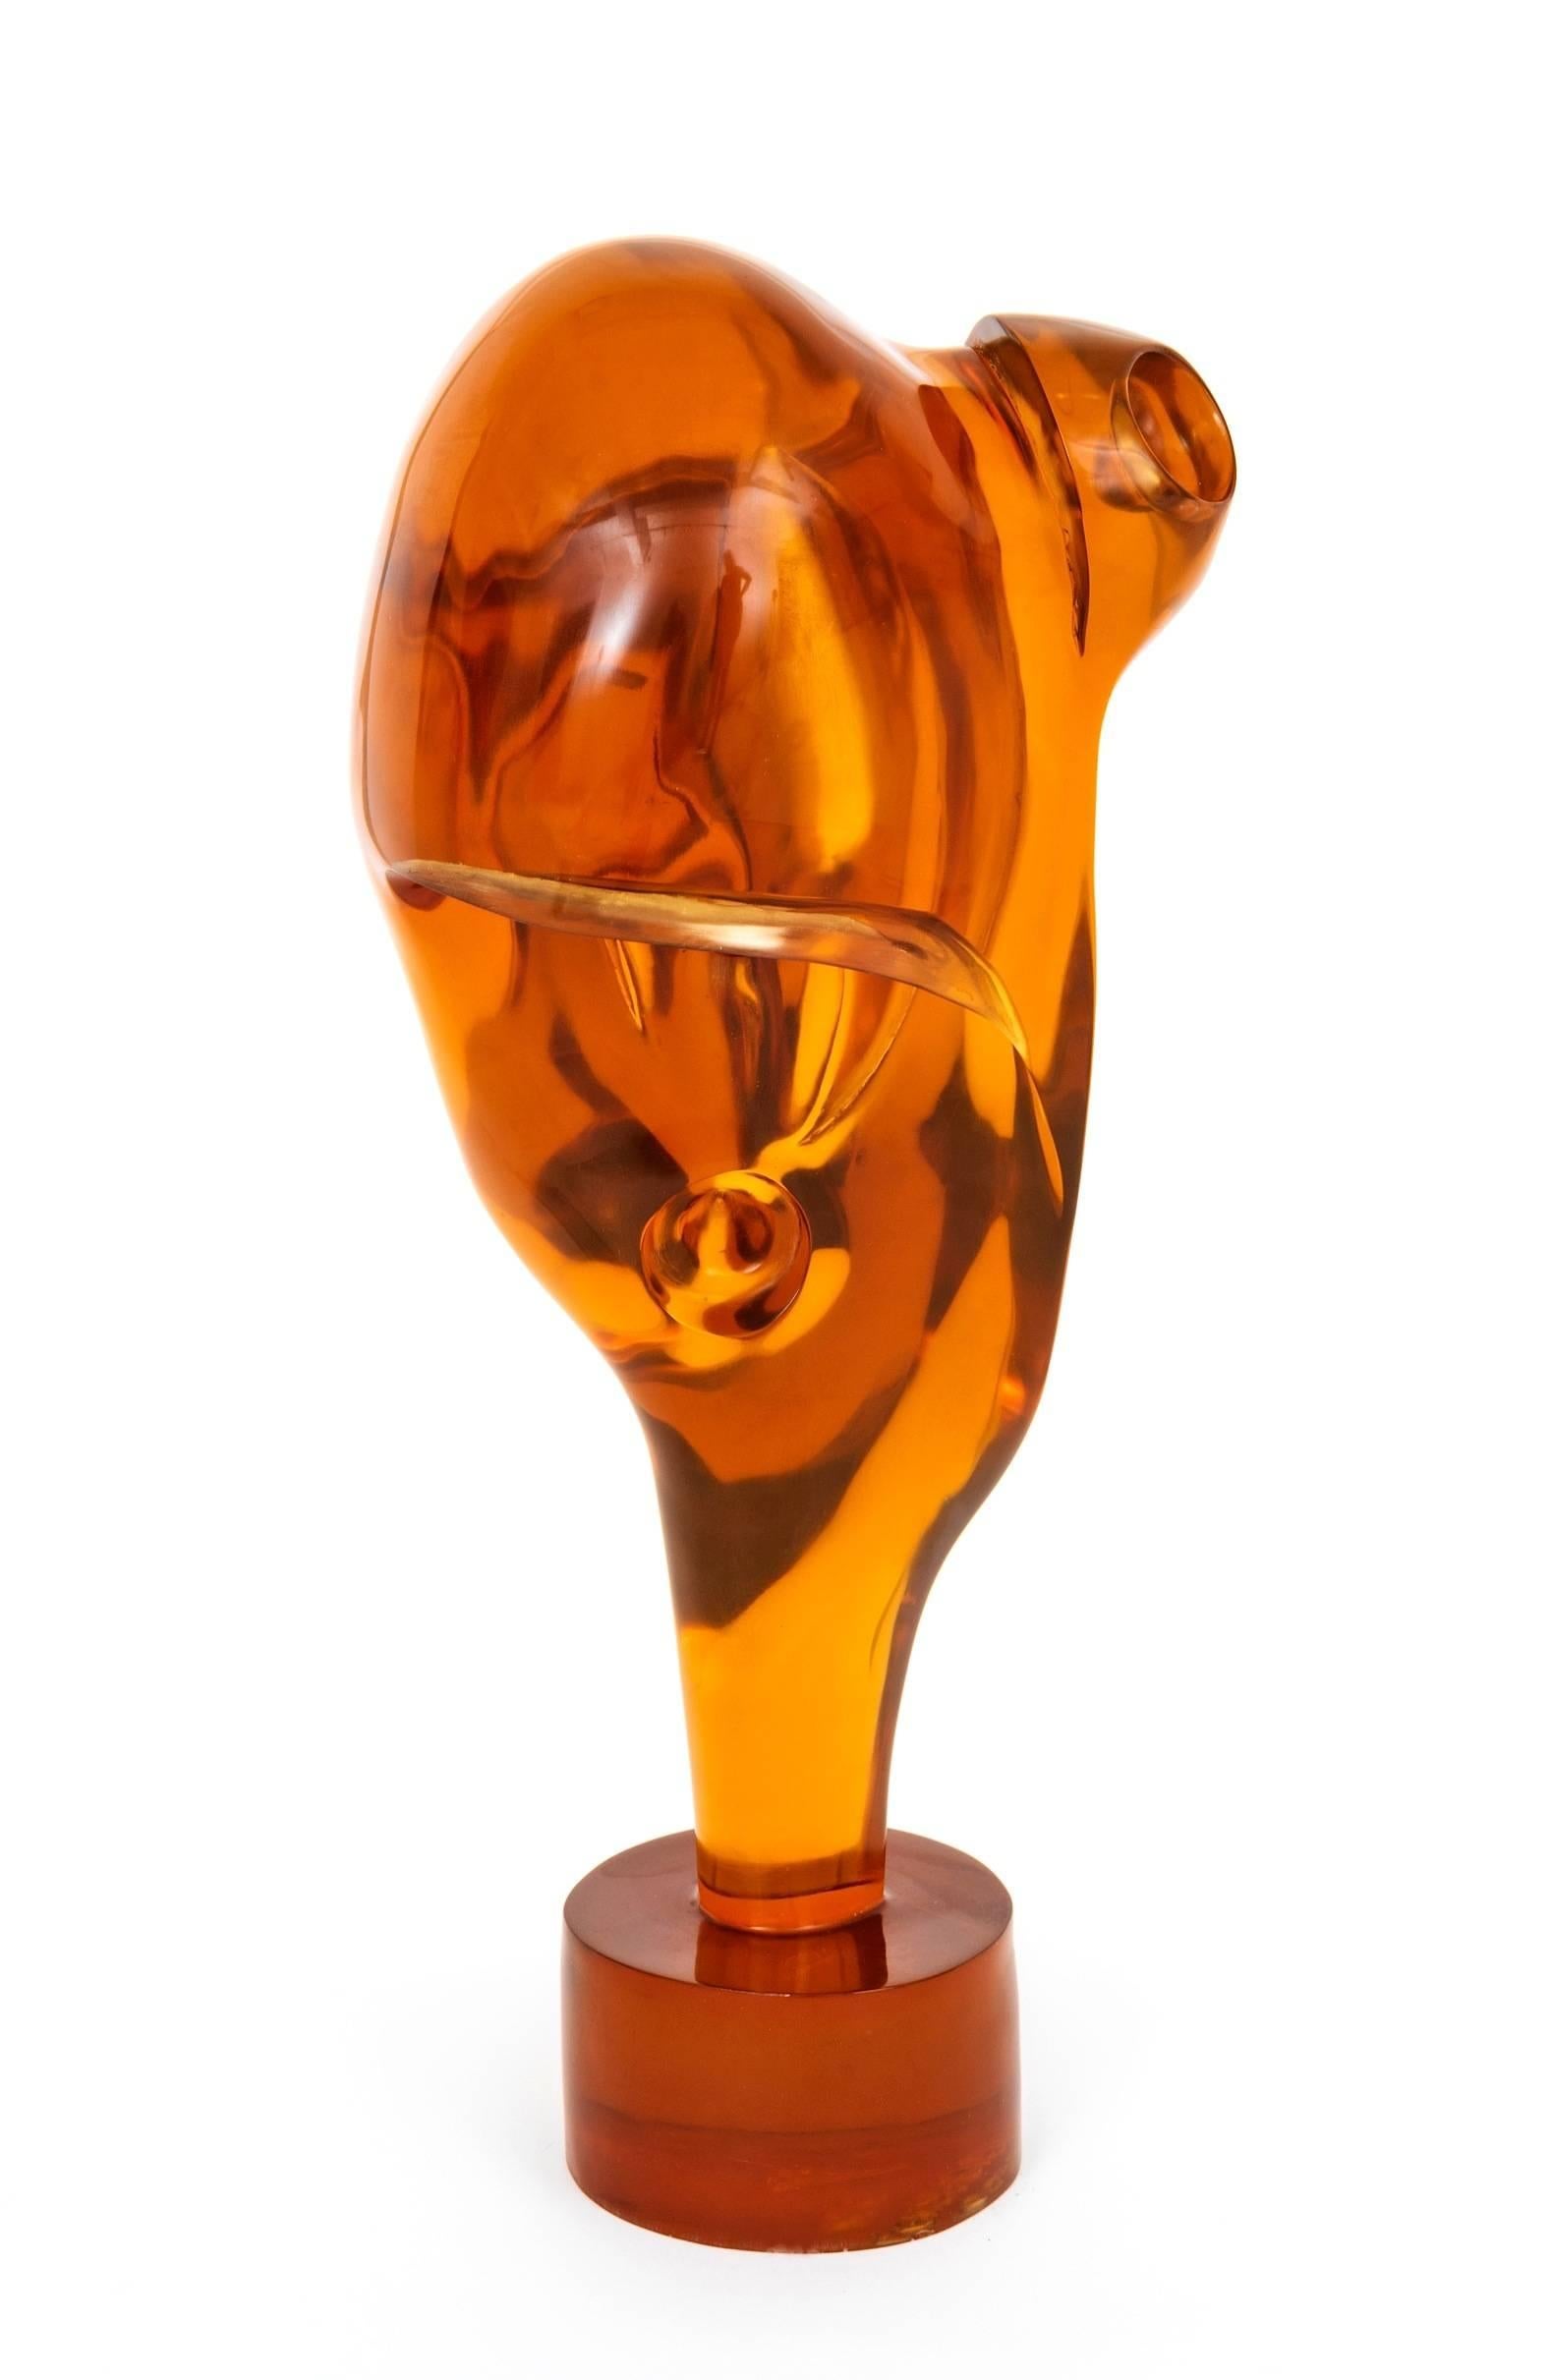 Stunning and large pop of orange 1970s resin or lucite sculpture by Henry Guerriero. Henry was represented by the Silvan Simone Gallery in LA during the 1960s and 1970s. While he worked in bronze he turned towards lucite in the mid-1970s so he could